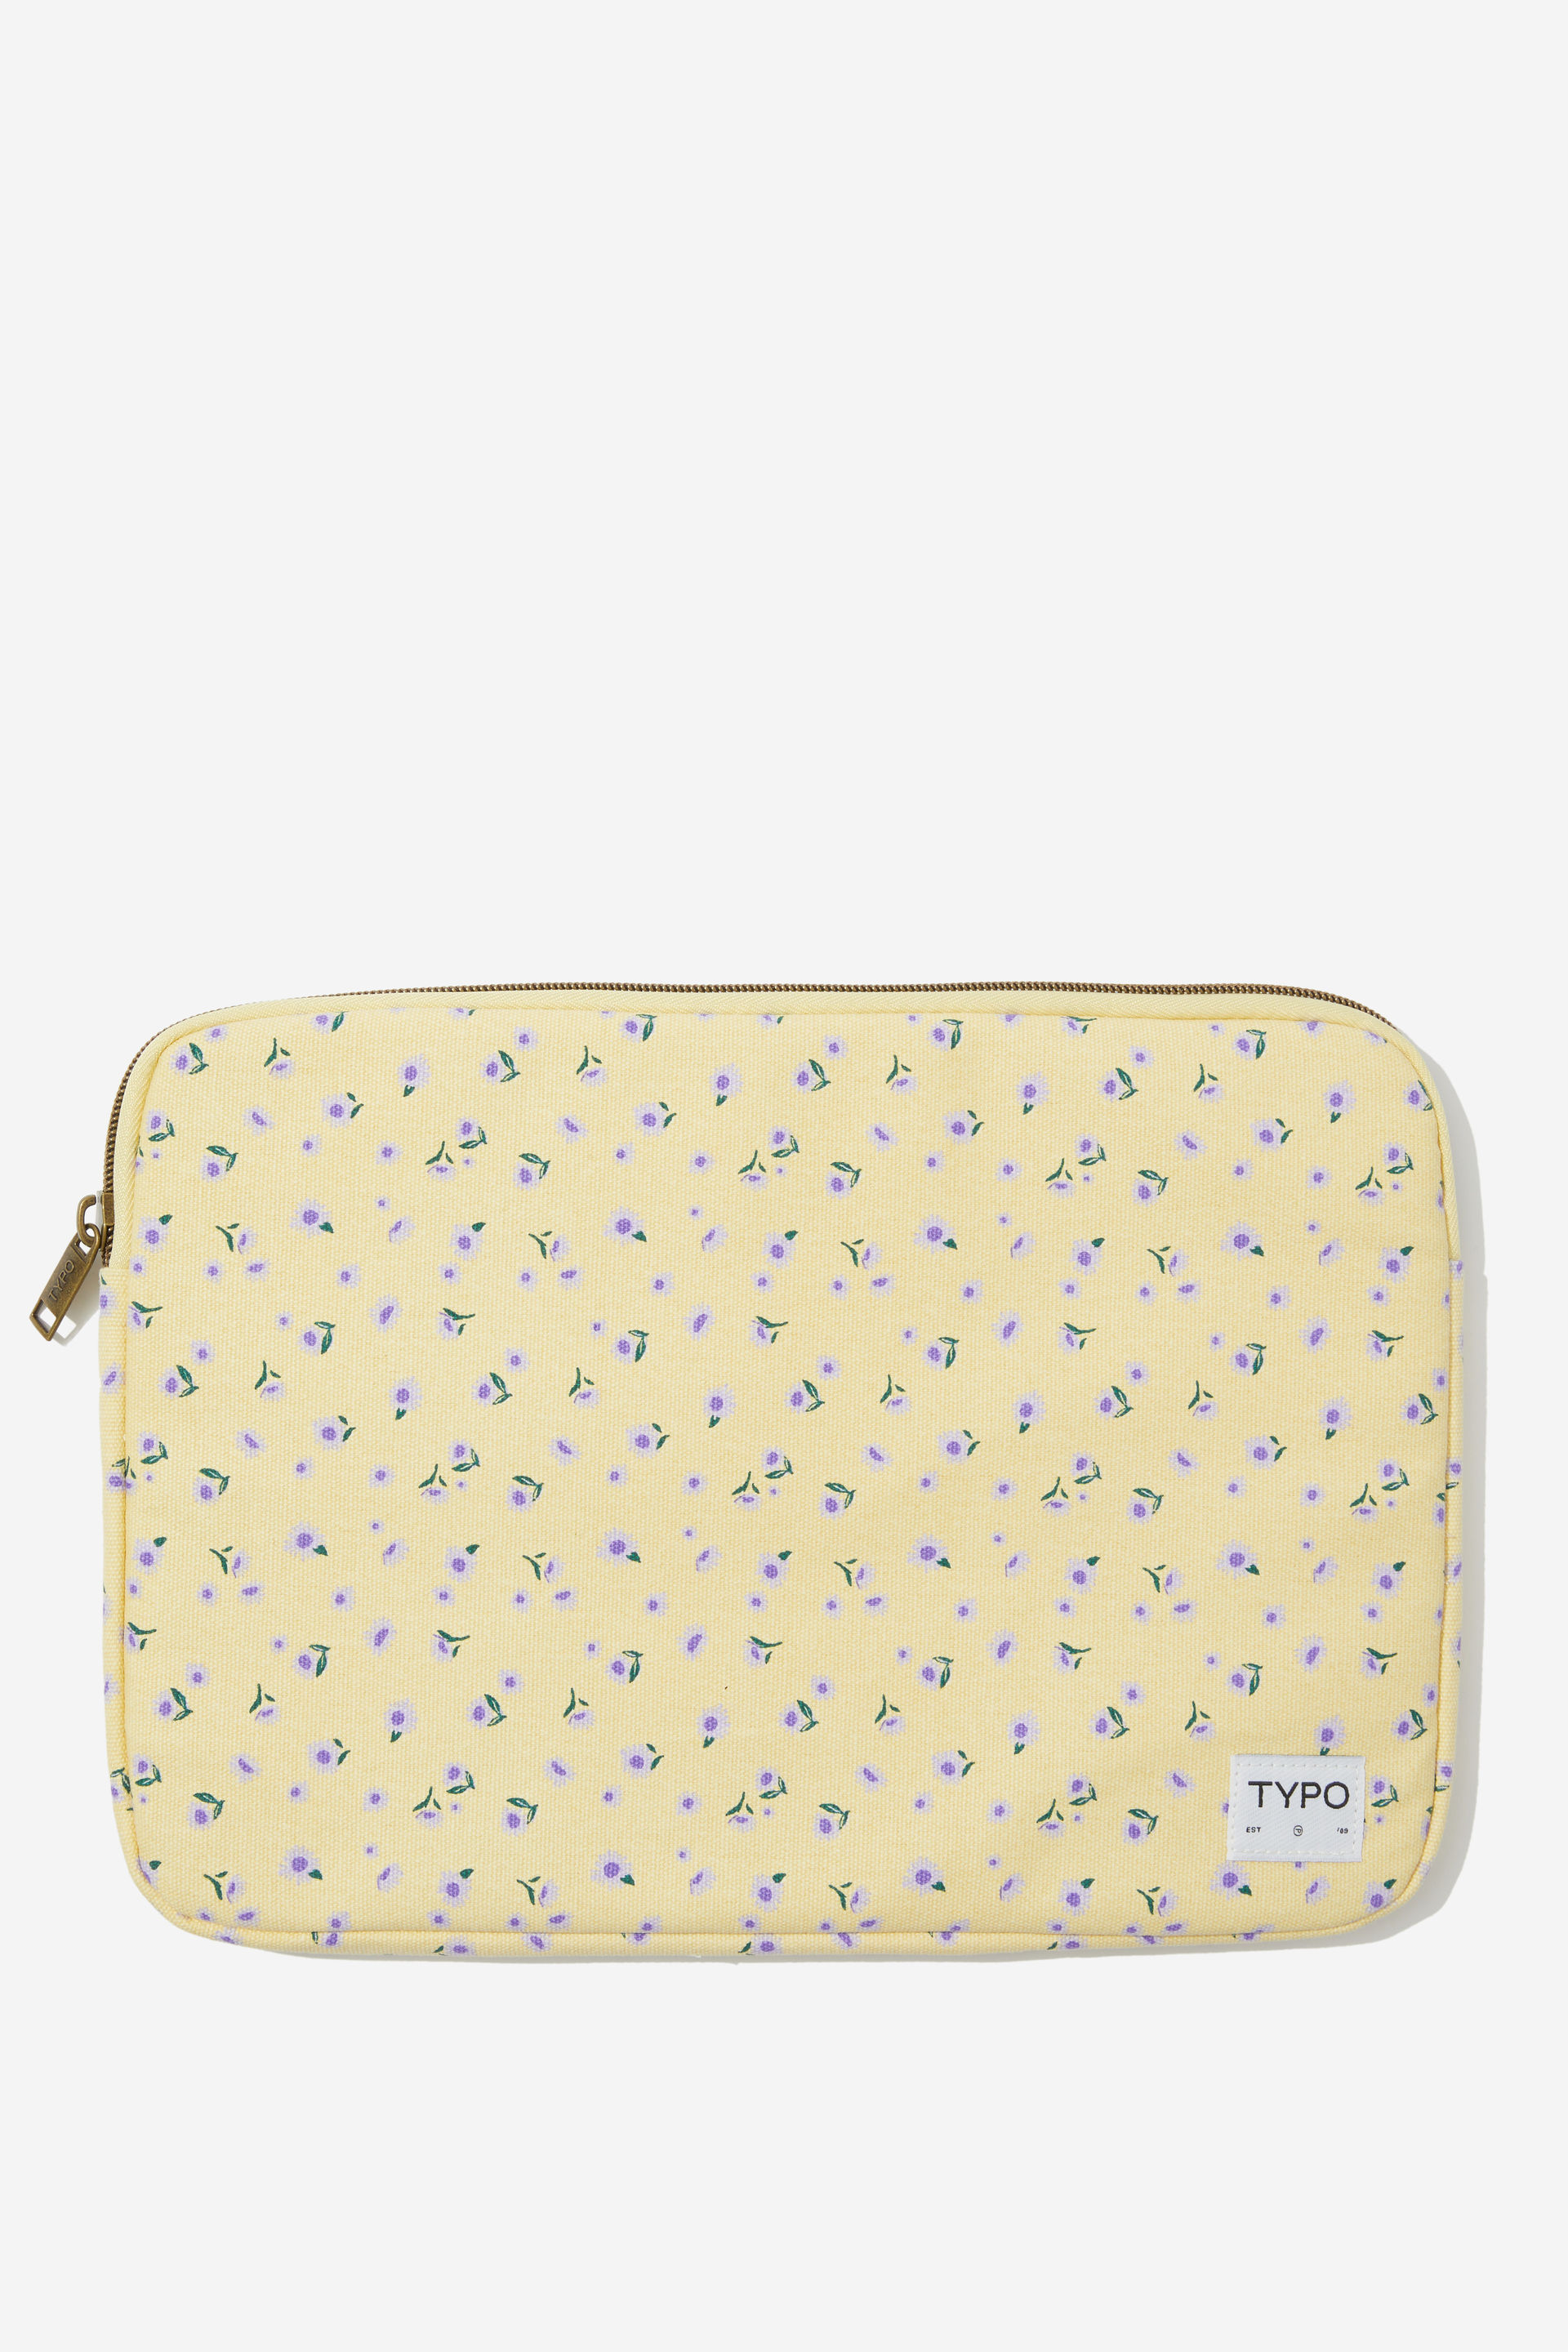 Typo - Take Me Away 13 Inch Laptop Case - Daisy ditsy / butter